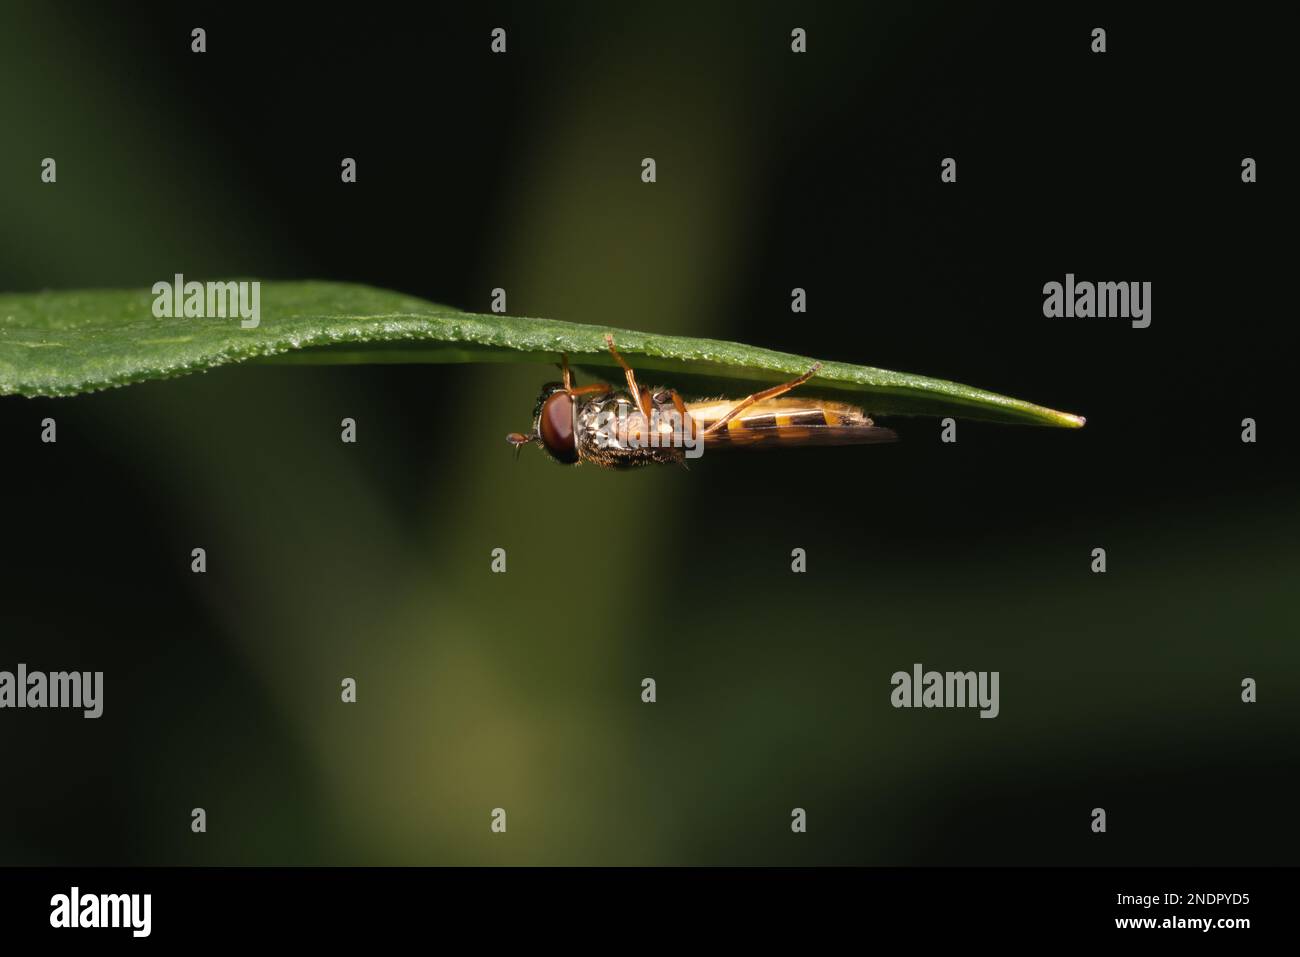 A close up of a Platycheirus crawling on a leaf, isolated on blurred background Stock Photo